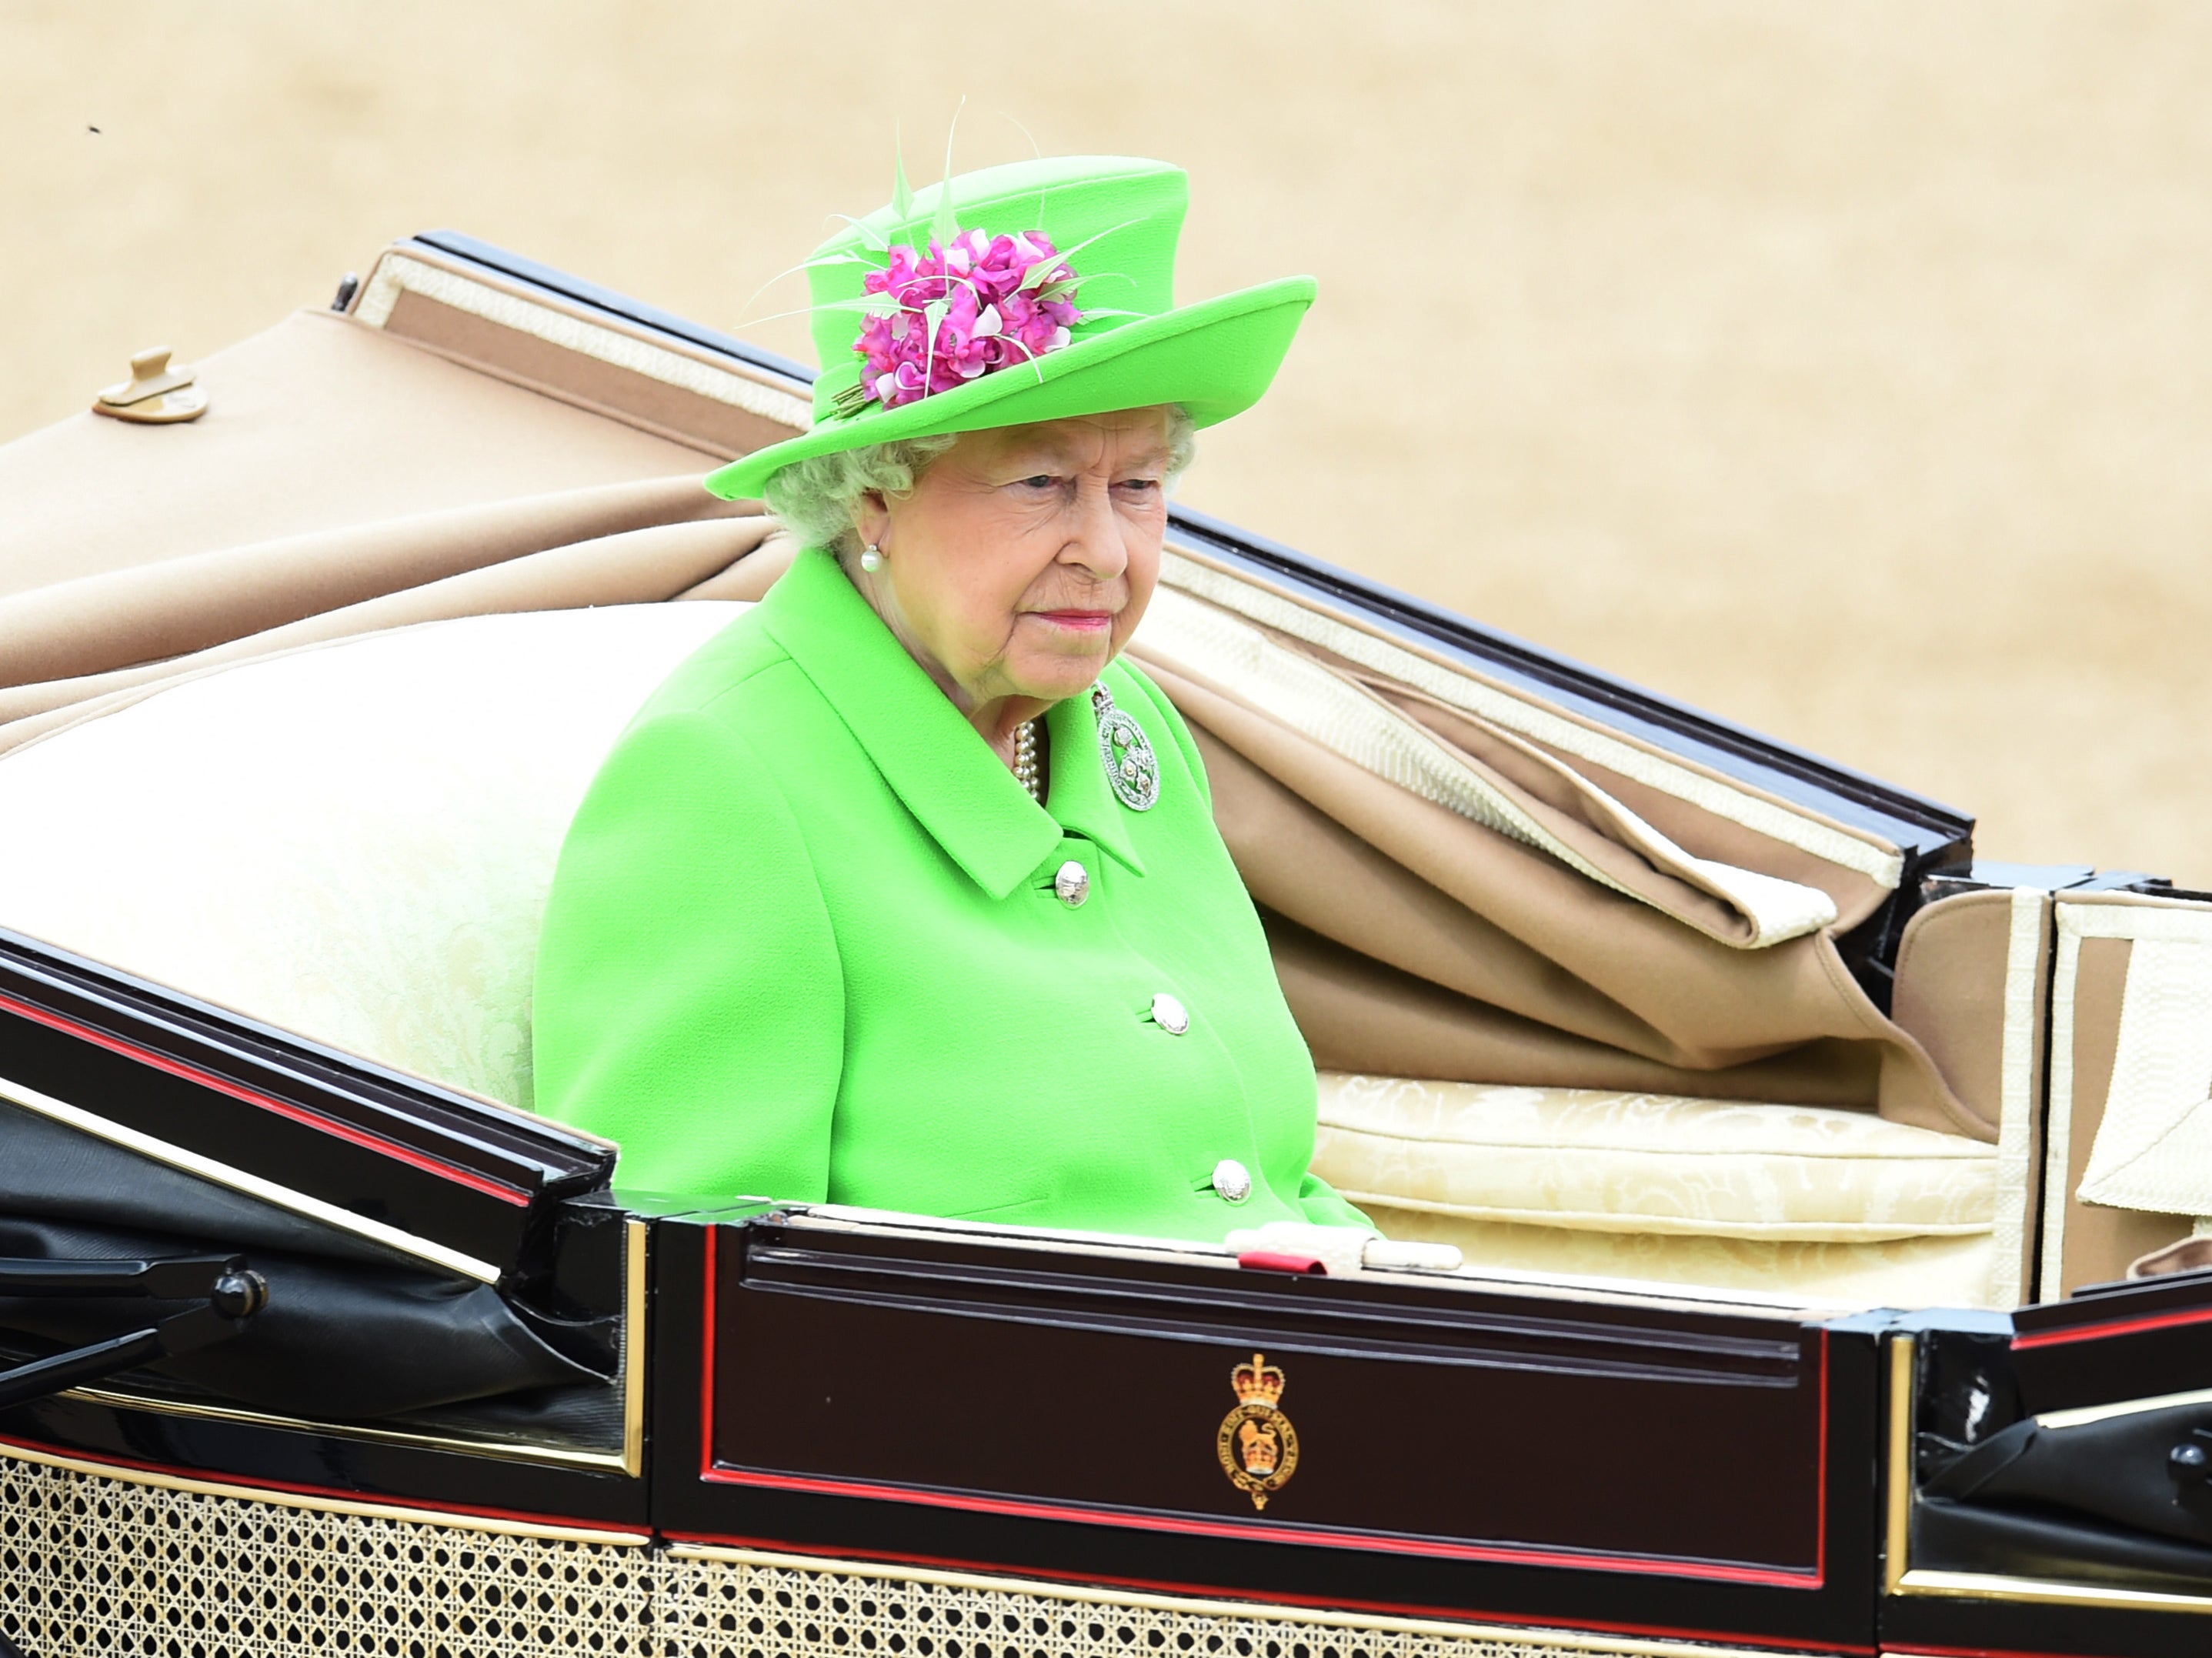 The Queen is the longest-reigning monarch in British history